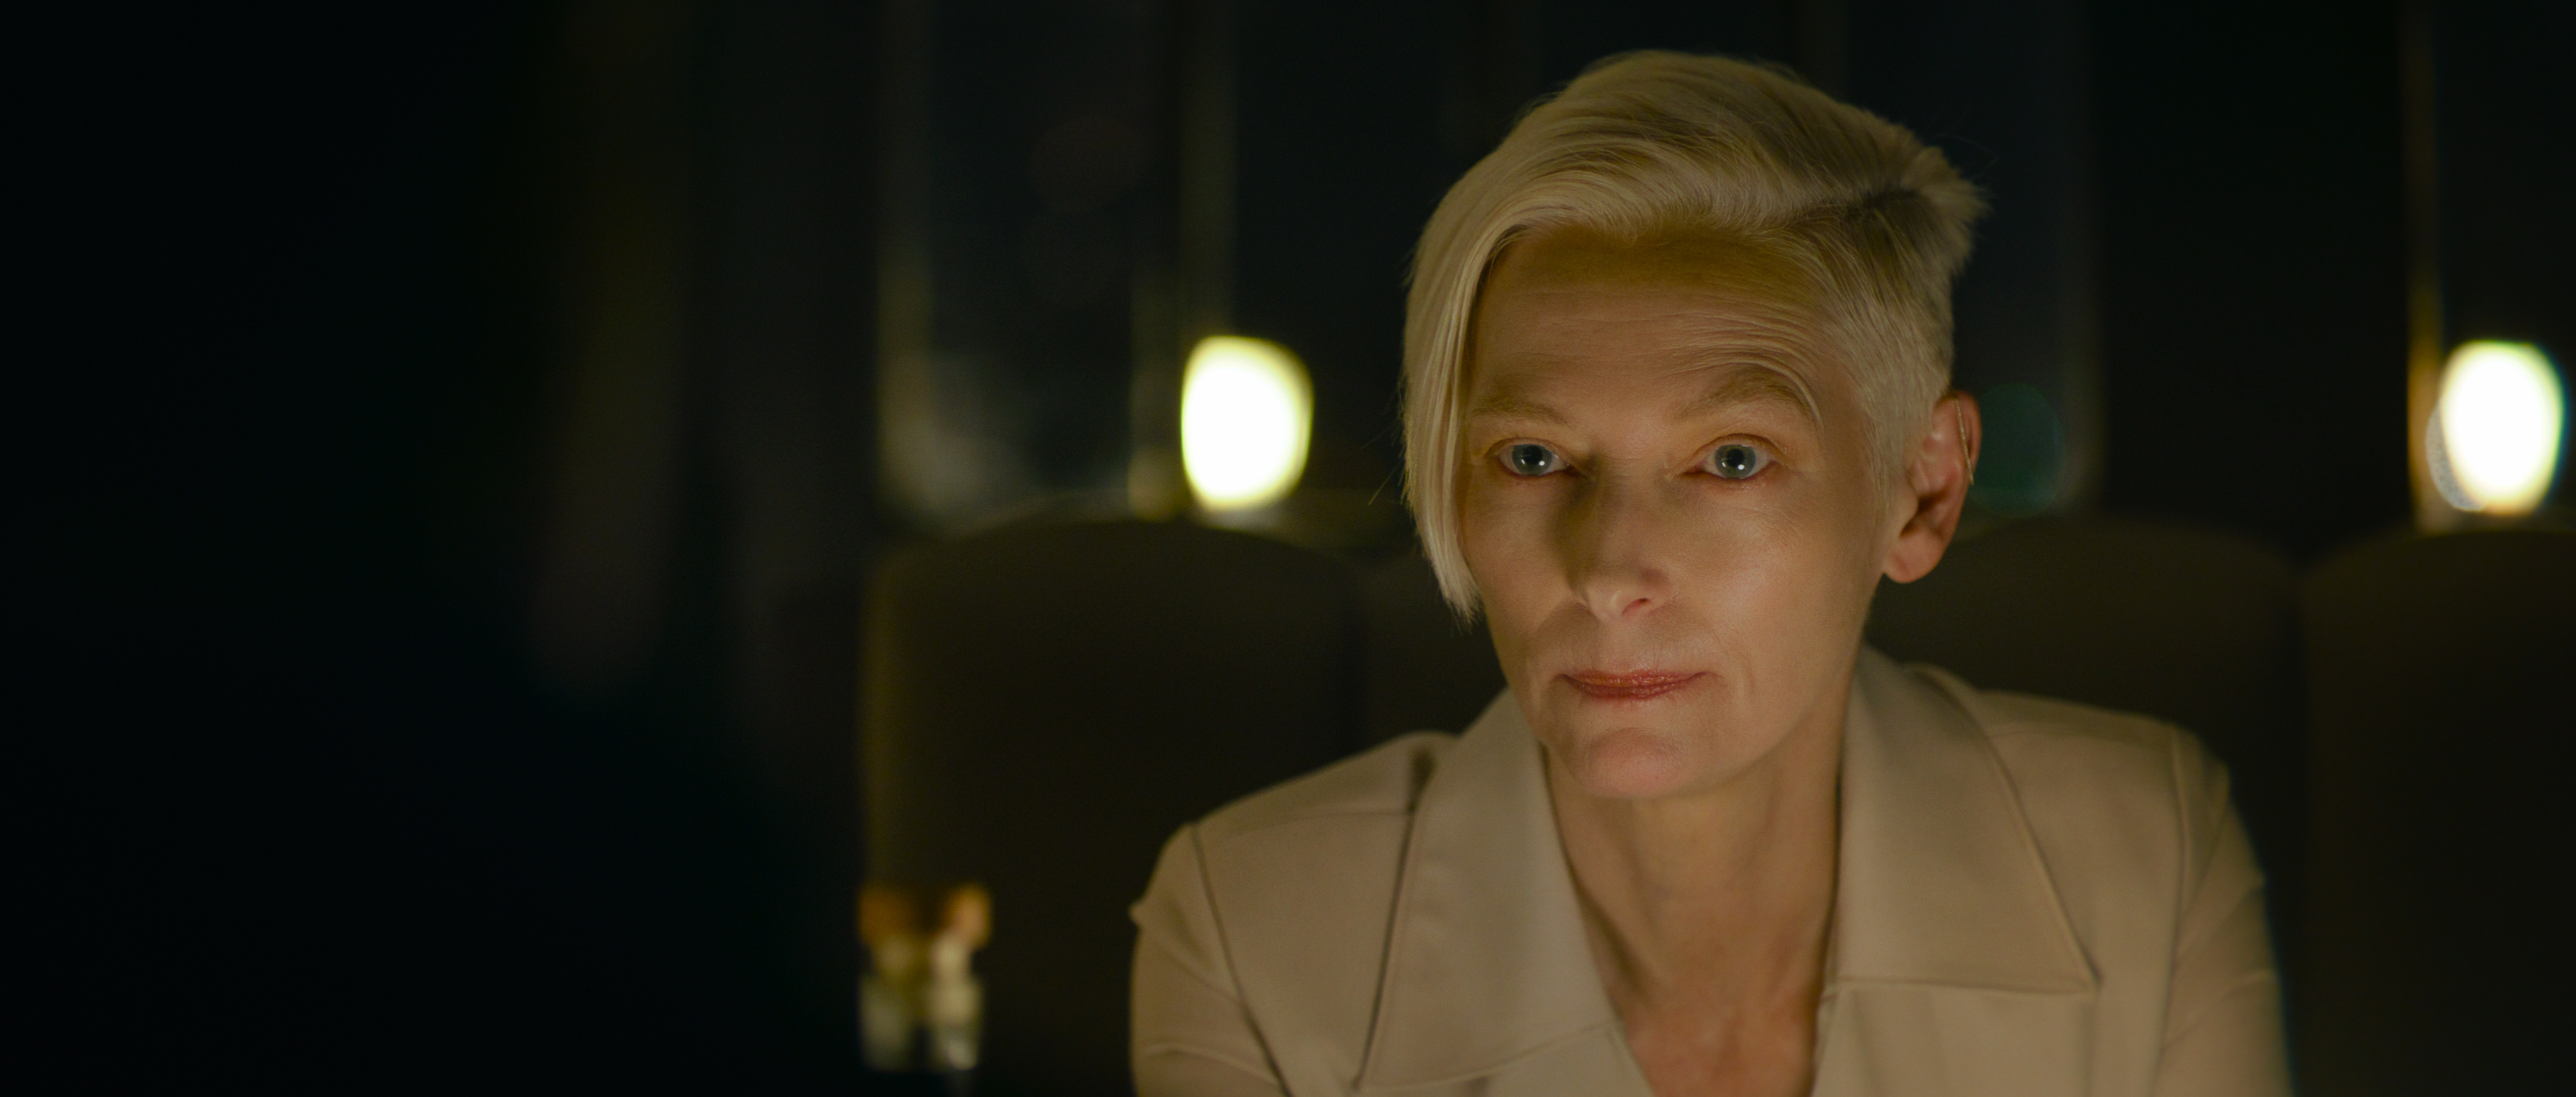 Tilda Swinton, with swooped-over white hair and wearing a white collared shirt, sits in the dark and looks intently into the camera in David Fincher’s The Killer